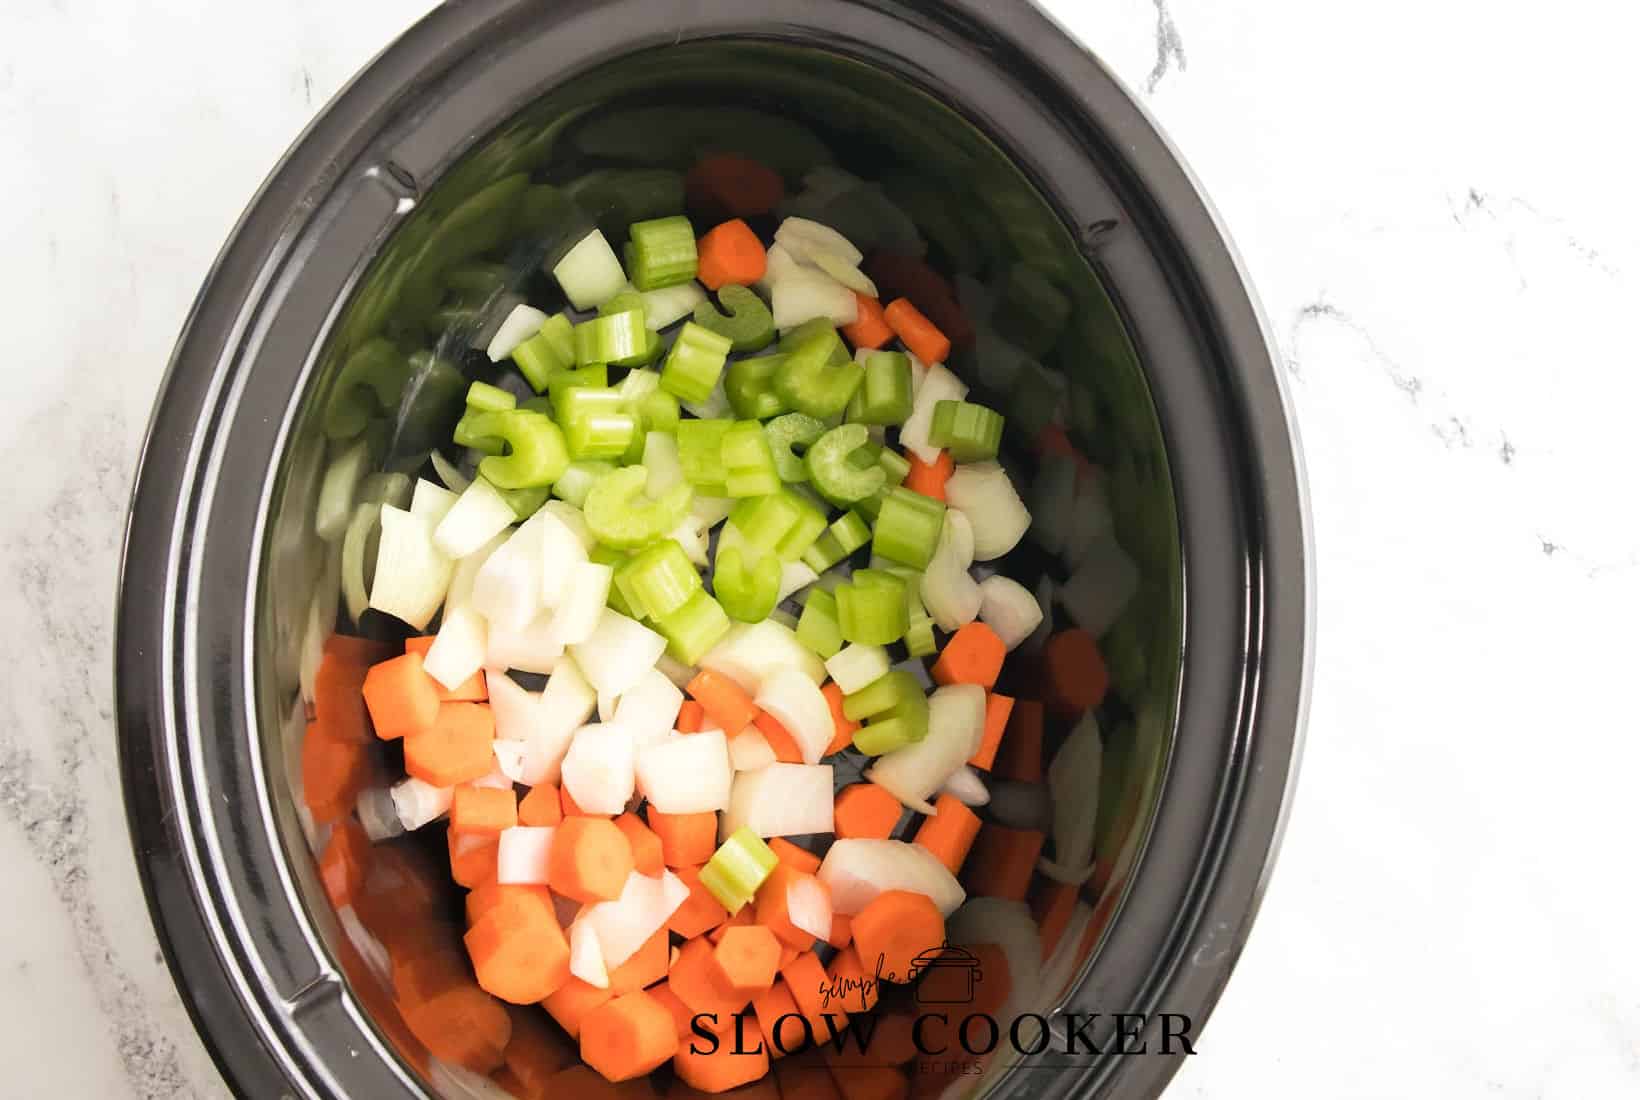 slow cooker with celery, onions and carrots in the bottom.